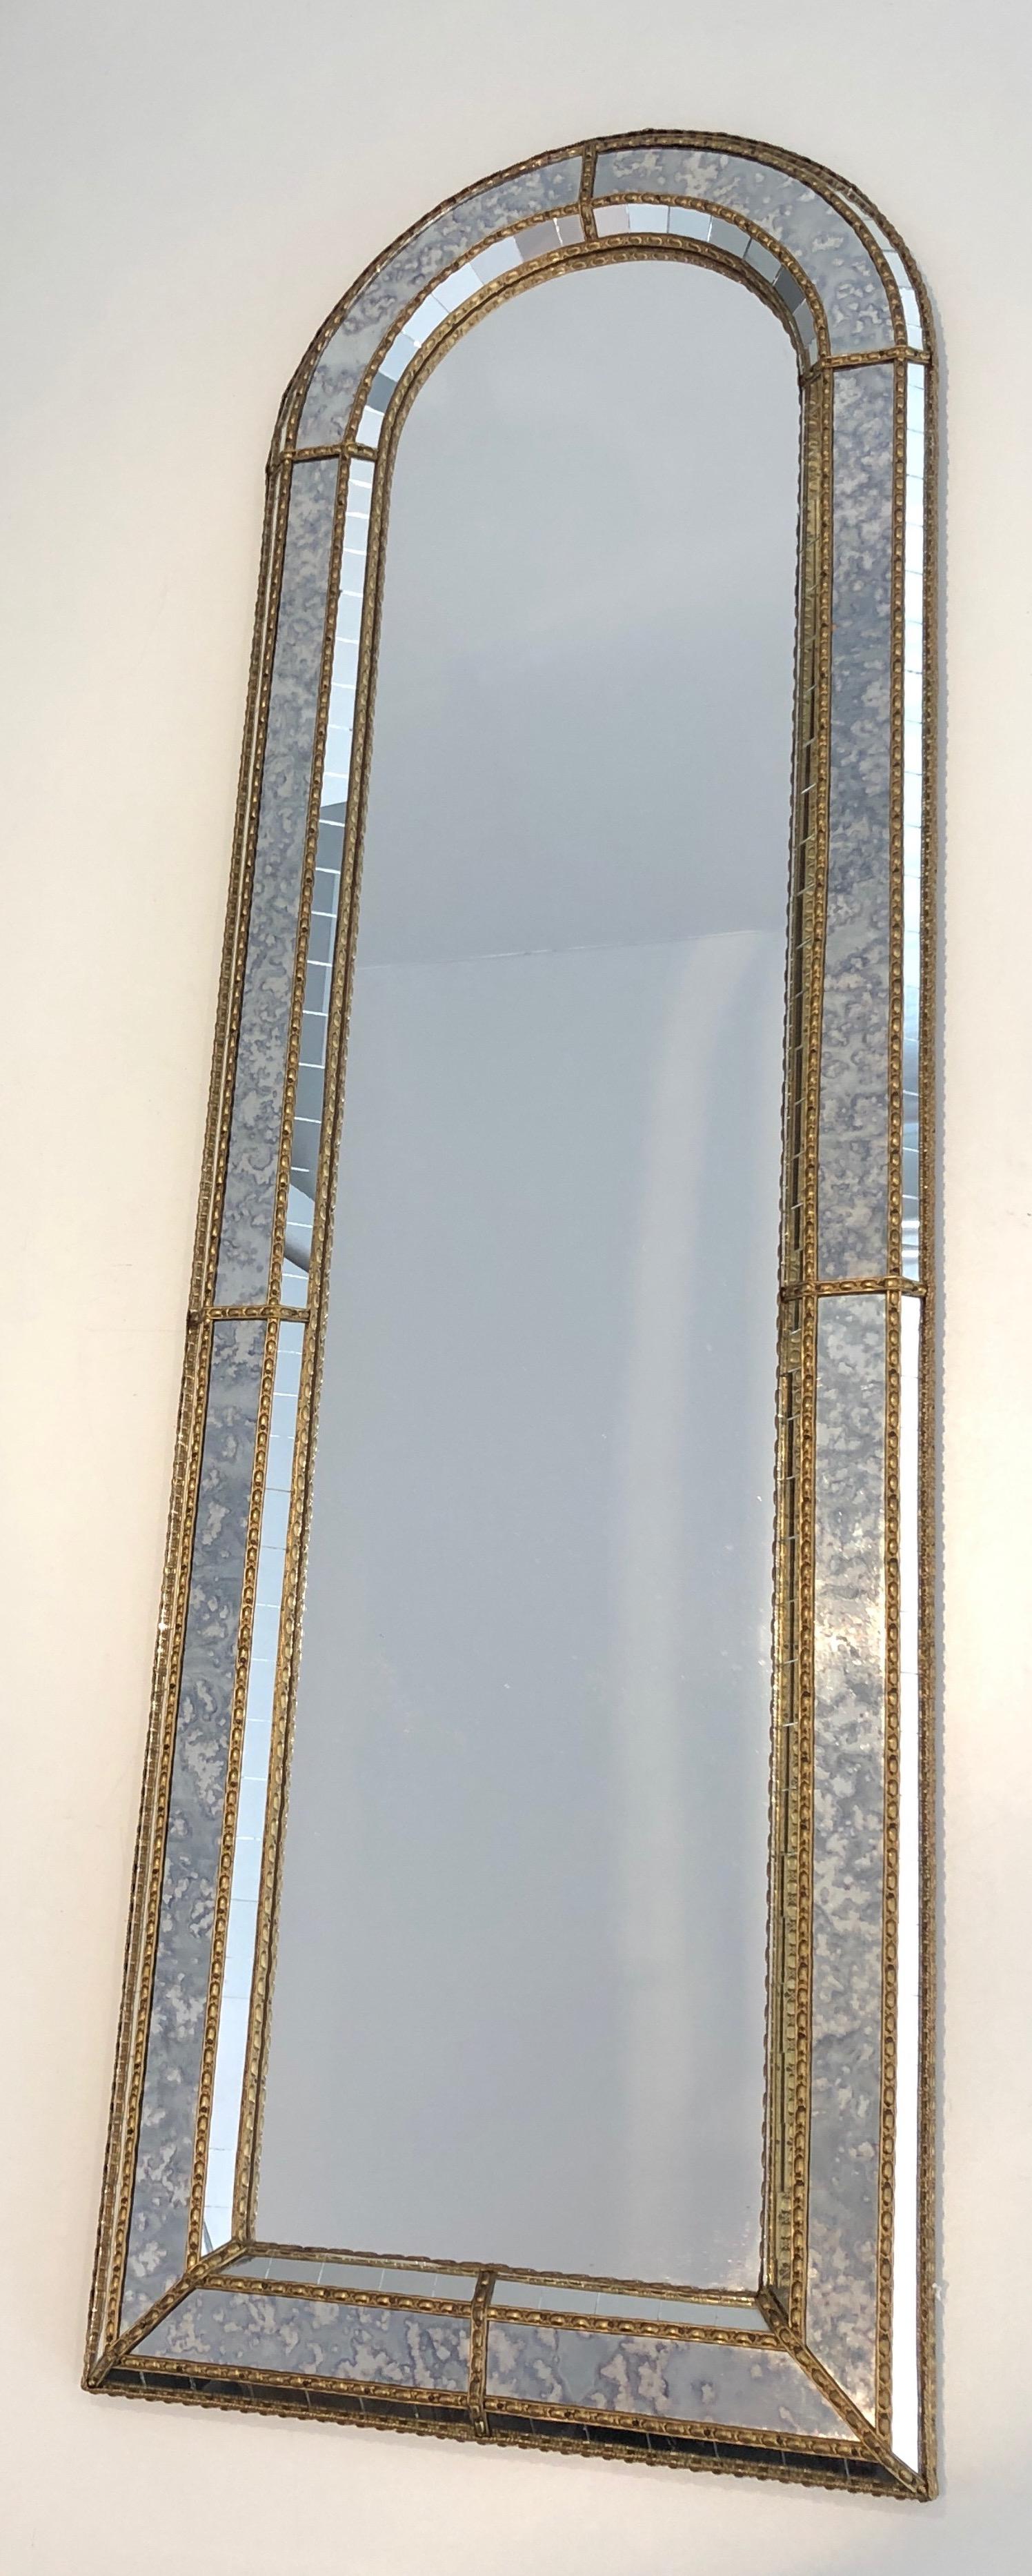 This very nice and decorative mirror is made of multi-facets mirrors with brass garlands. This mirror is rounded on top. This is a French work, circa 1970.